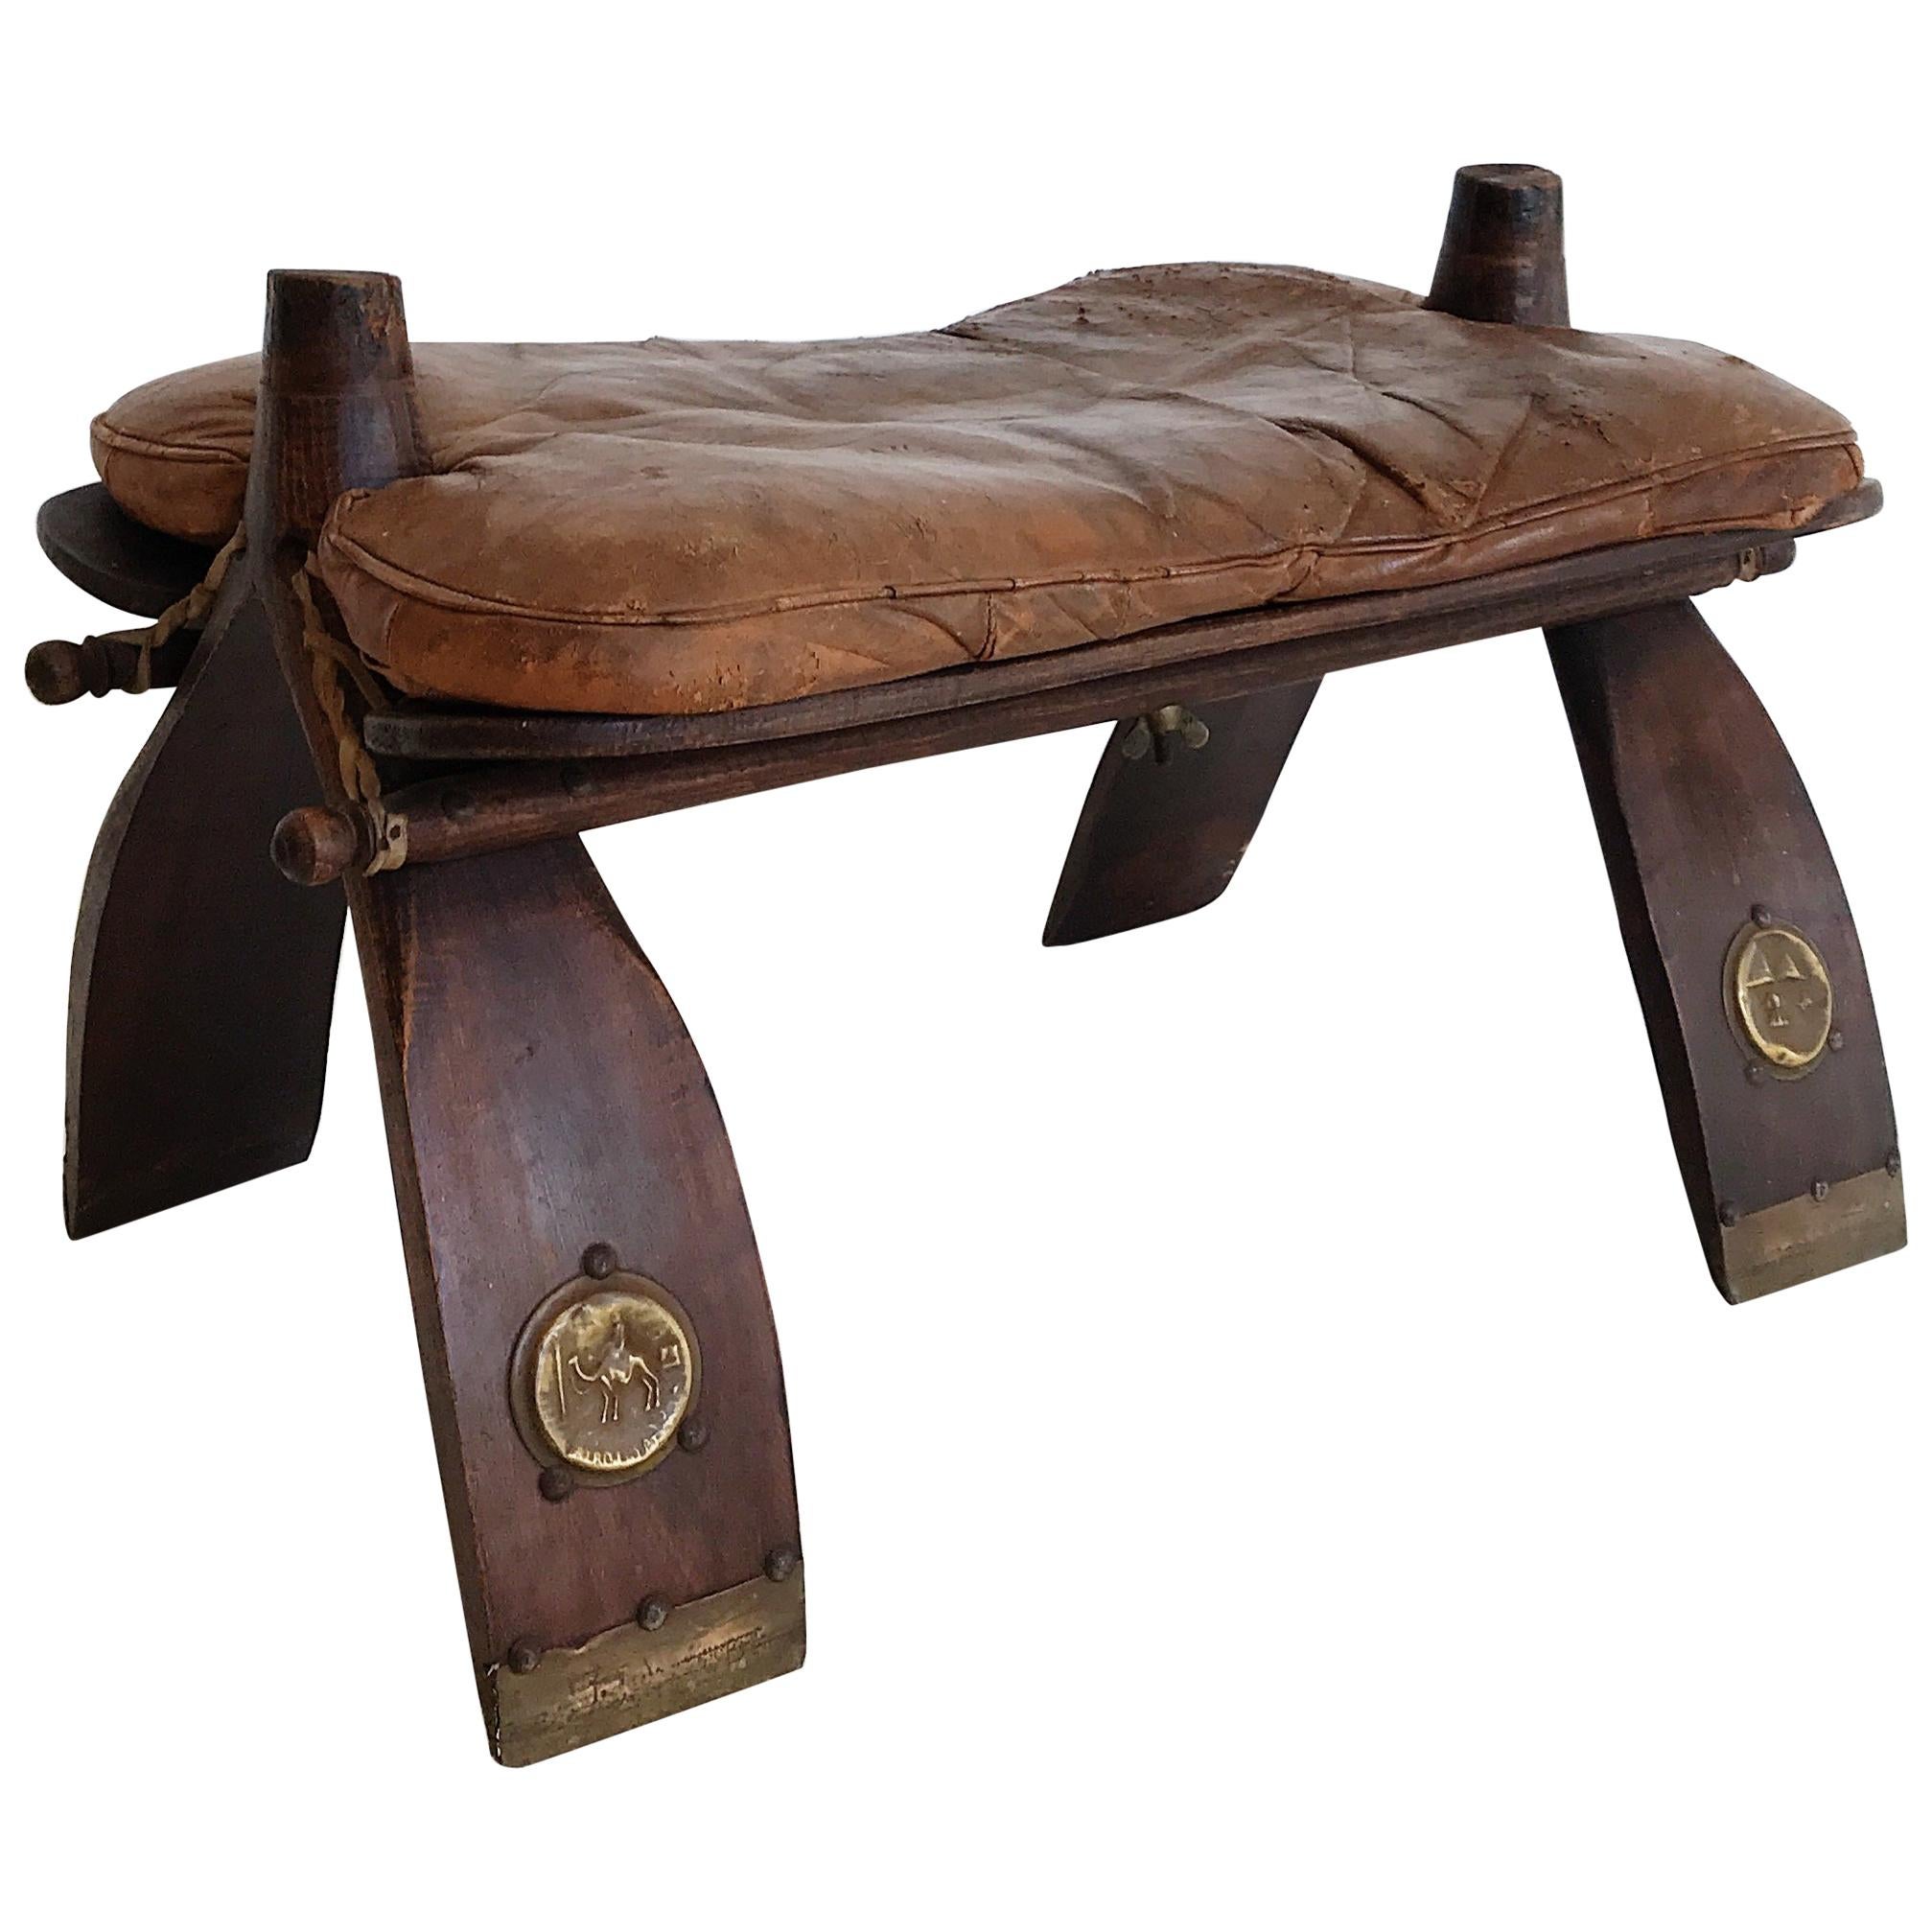 Mid-20th Century Egyptian Wooden Camel Saddle Stool with Original Leather Saddle For Sale